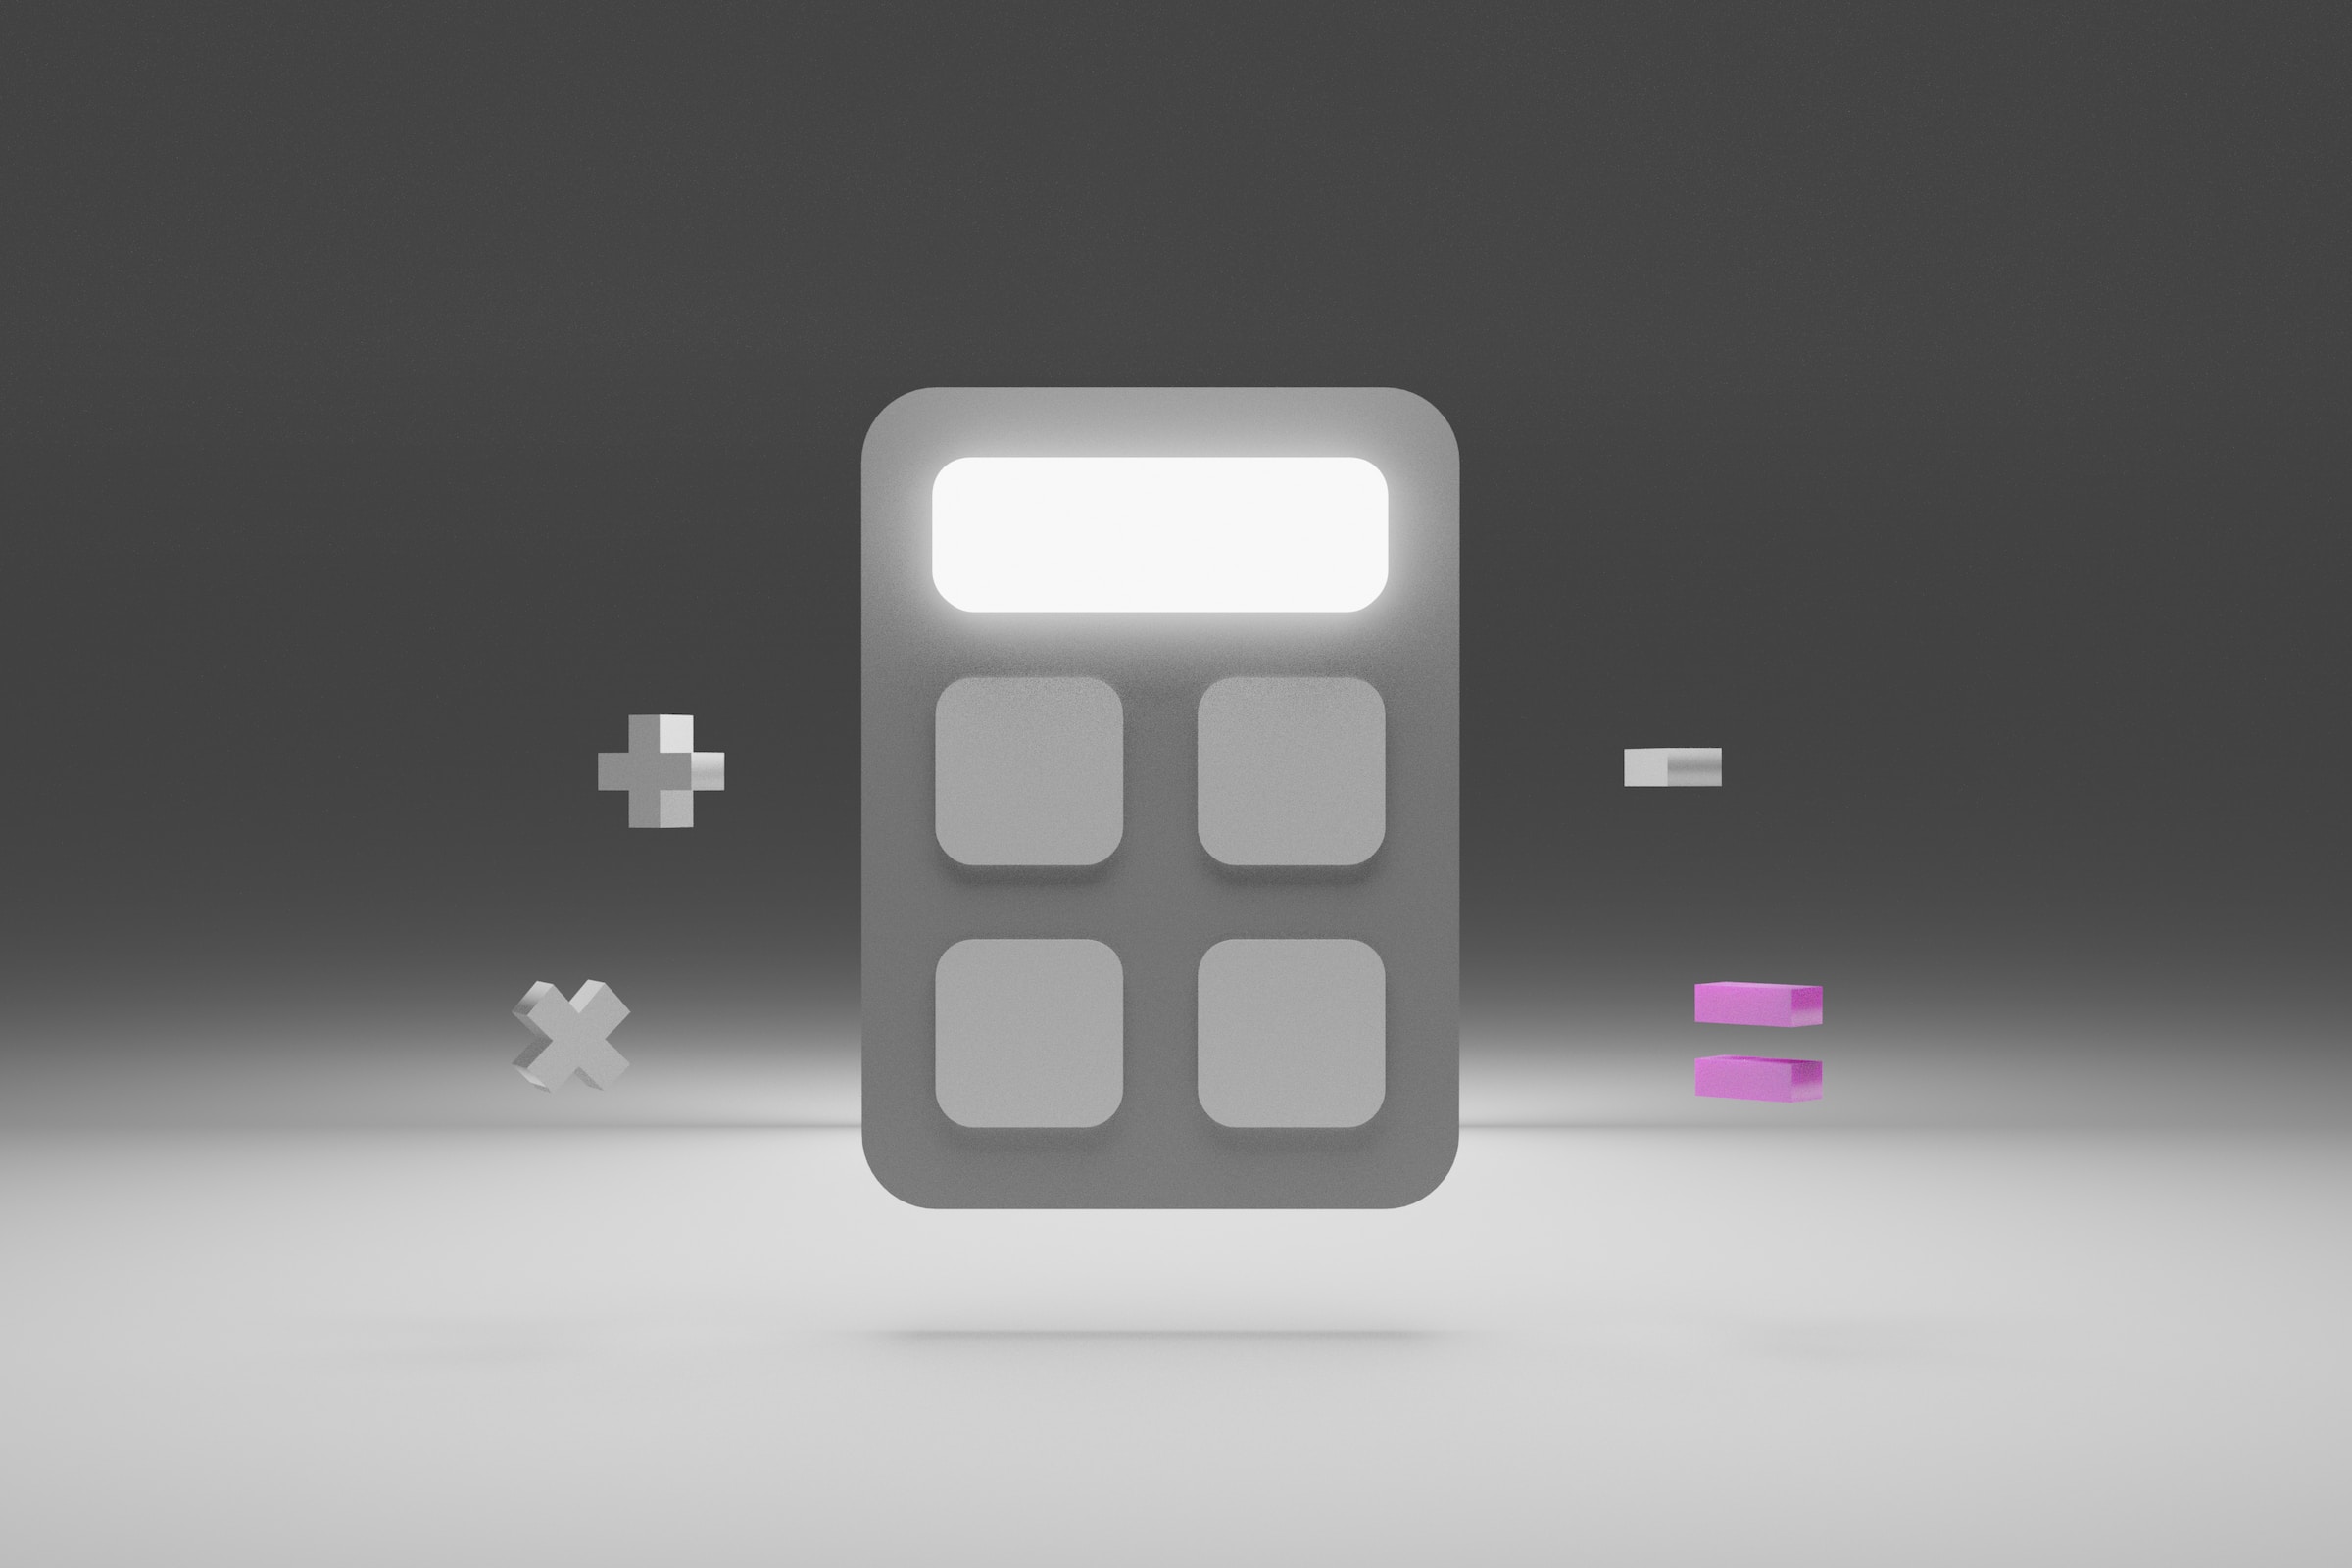 Rendering of a standard calculator with a floating plus sign, multiply sign, minus sign, and equal sign, representing the multitudes of fans who want to engage in your web3 community